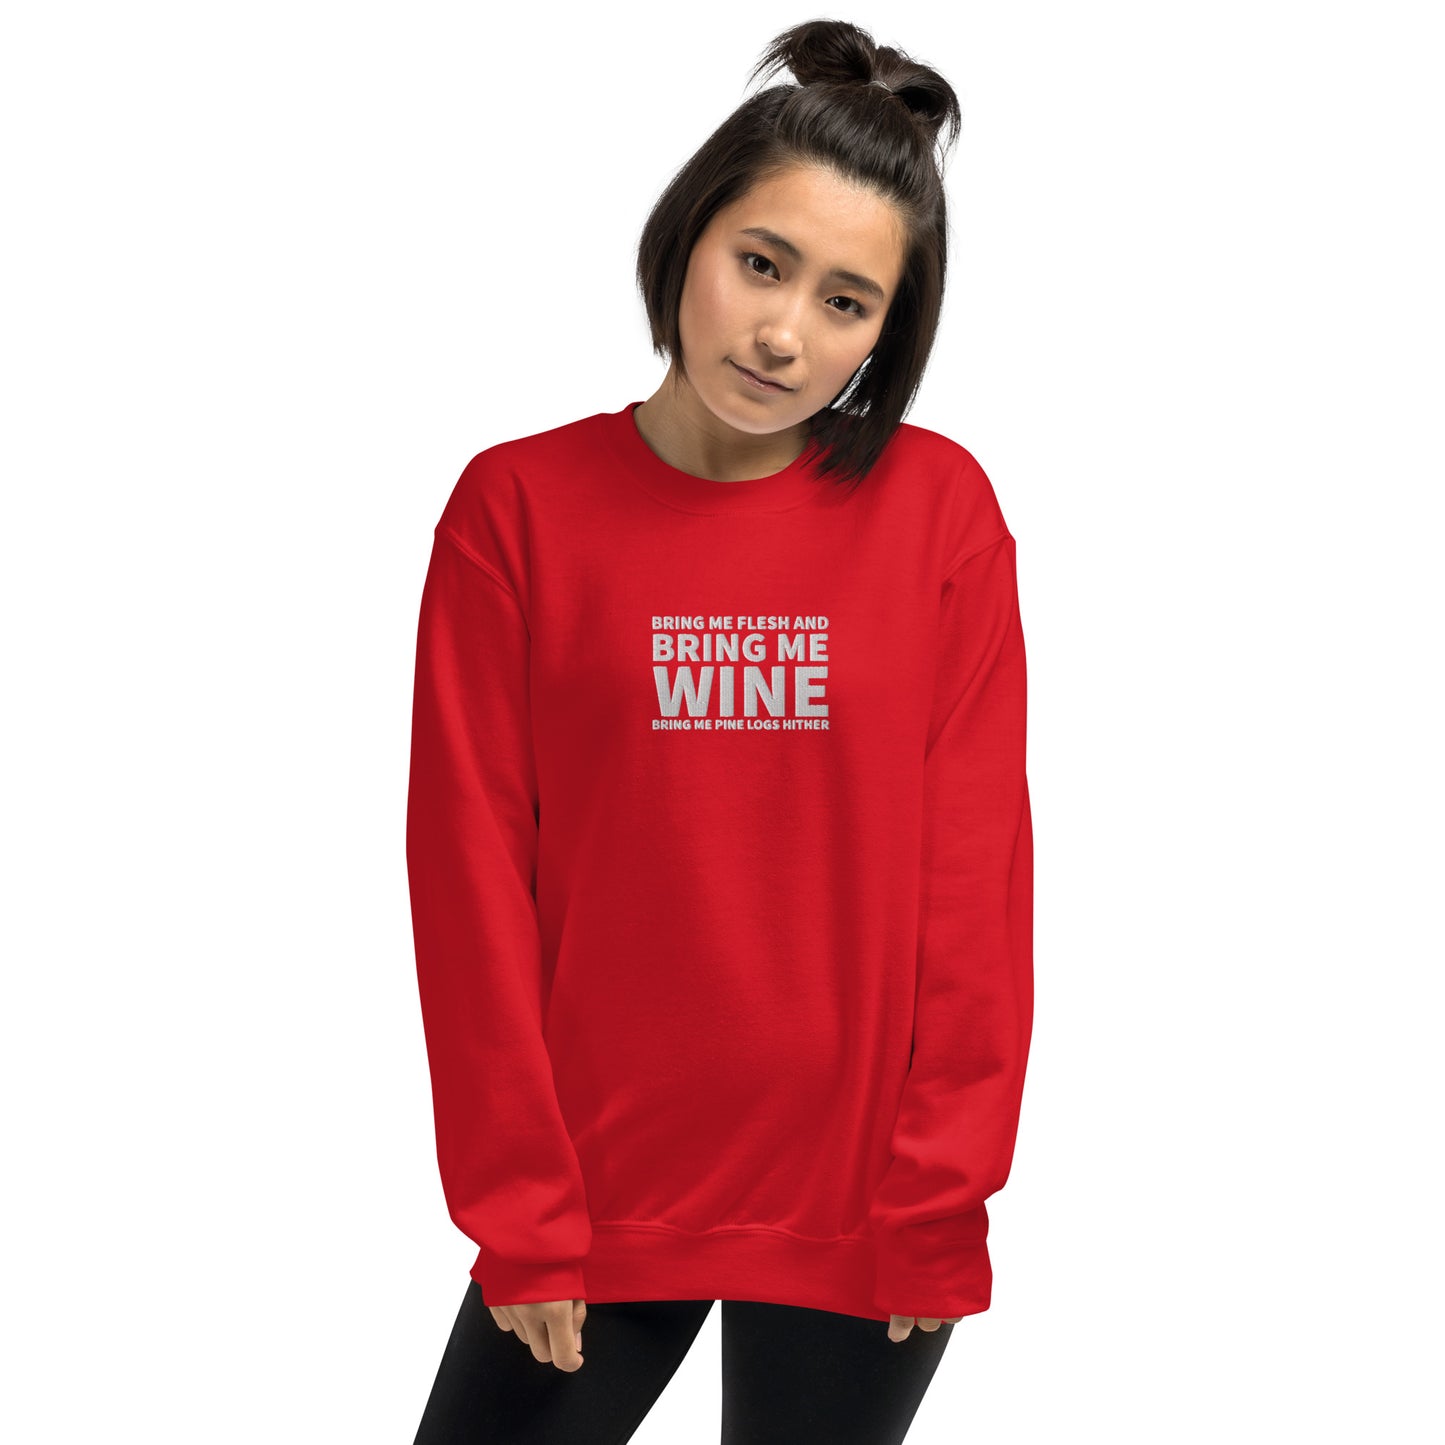 Bring me Wine (Signature Collection)